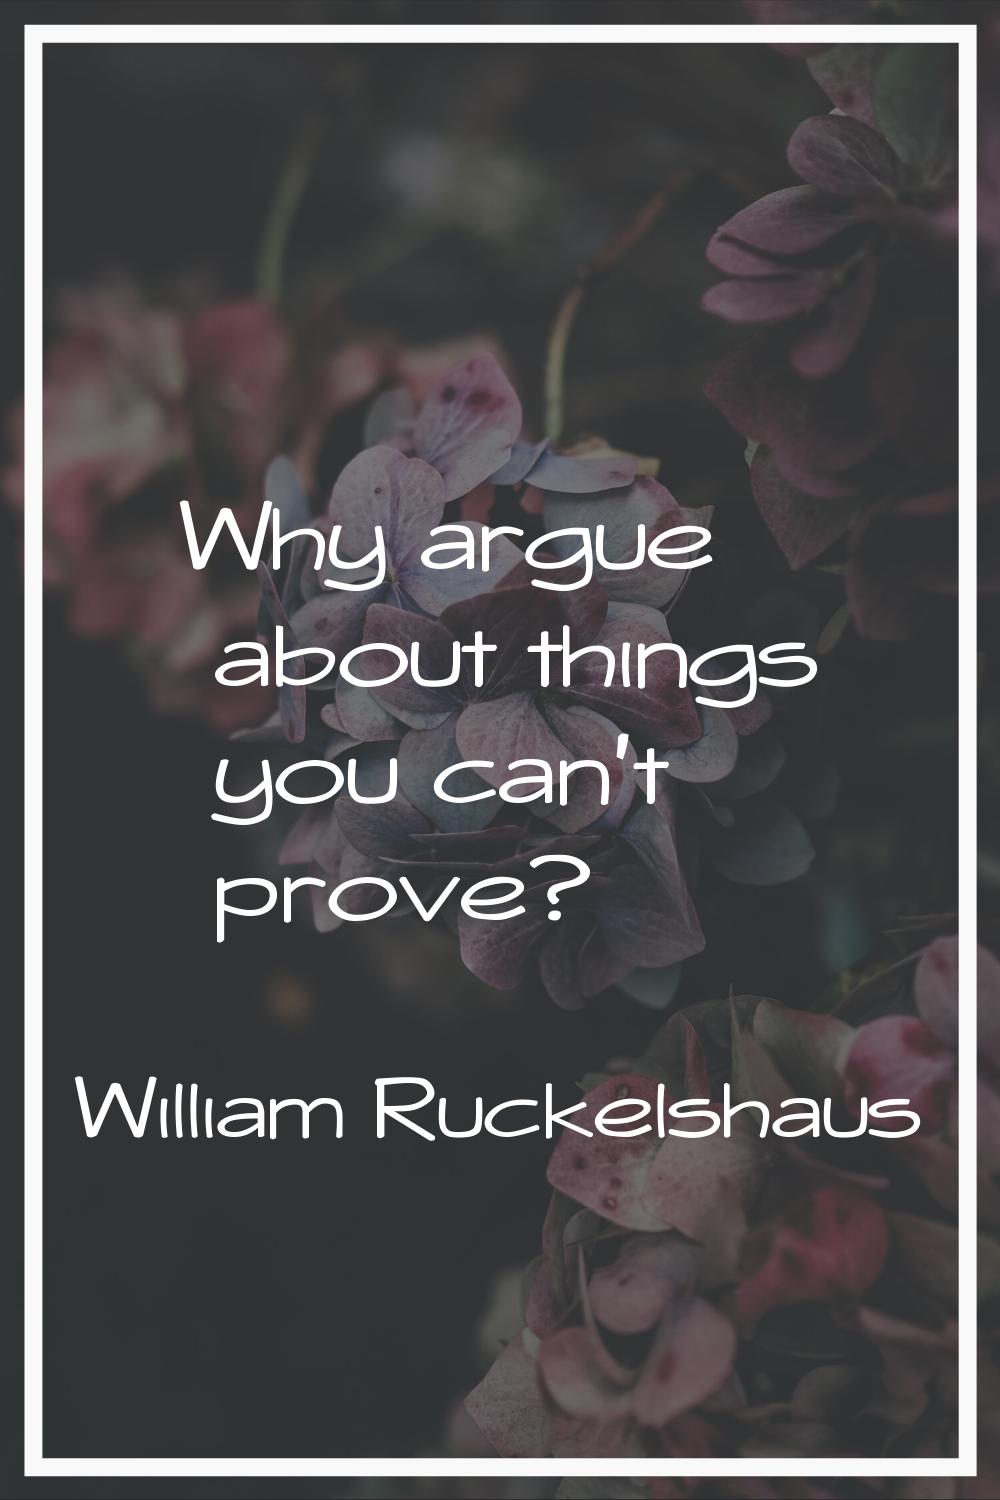 Why argue about things you can't prove?